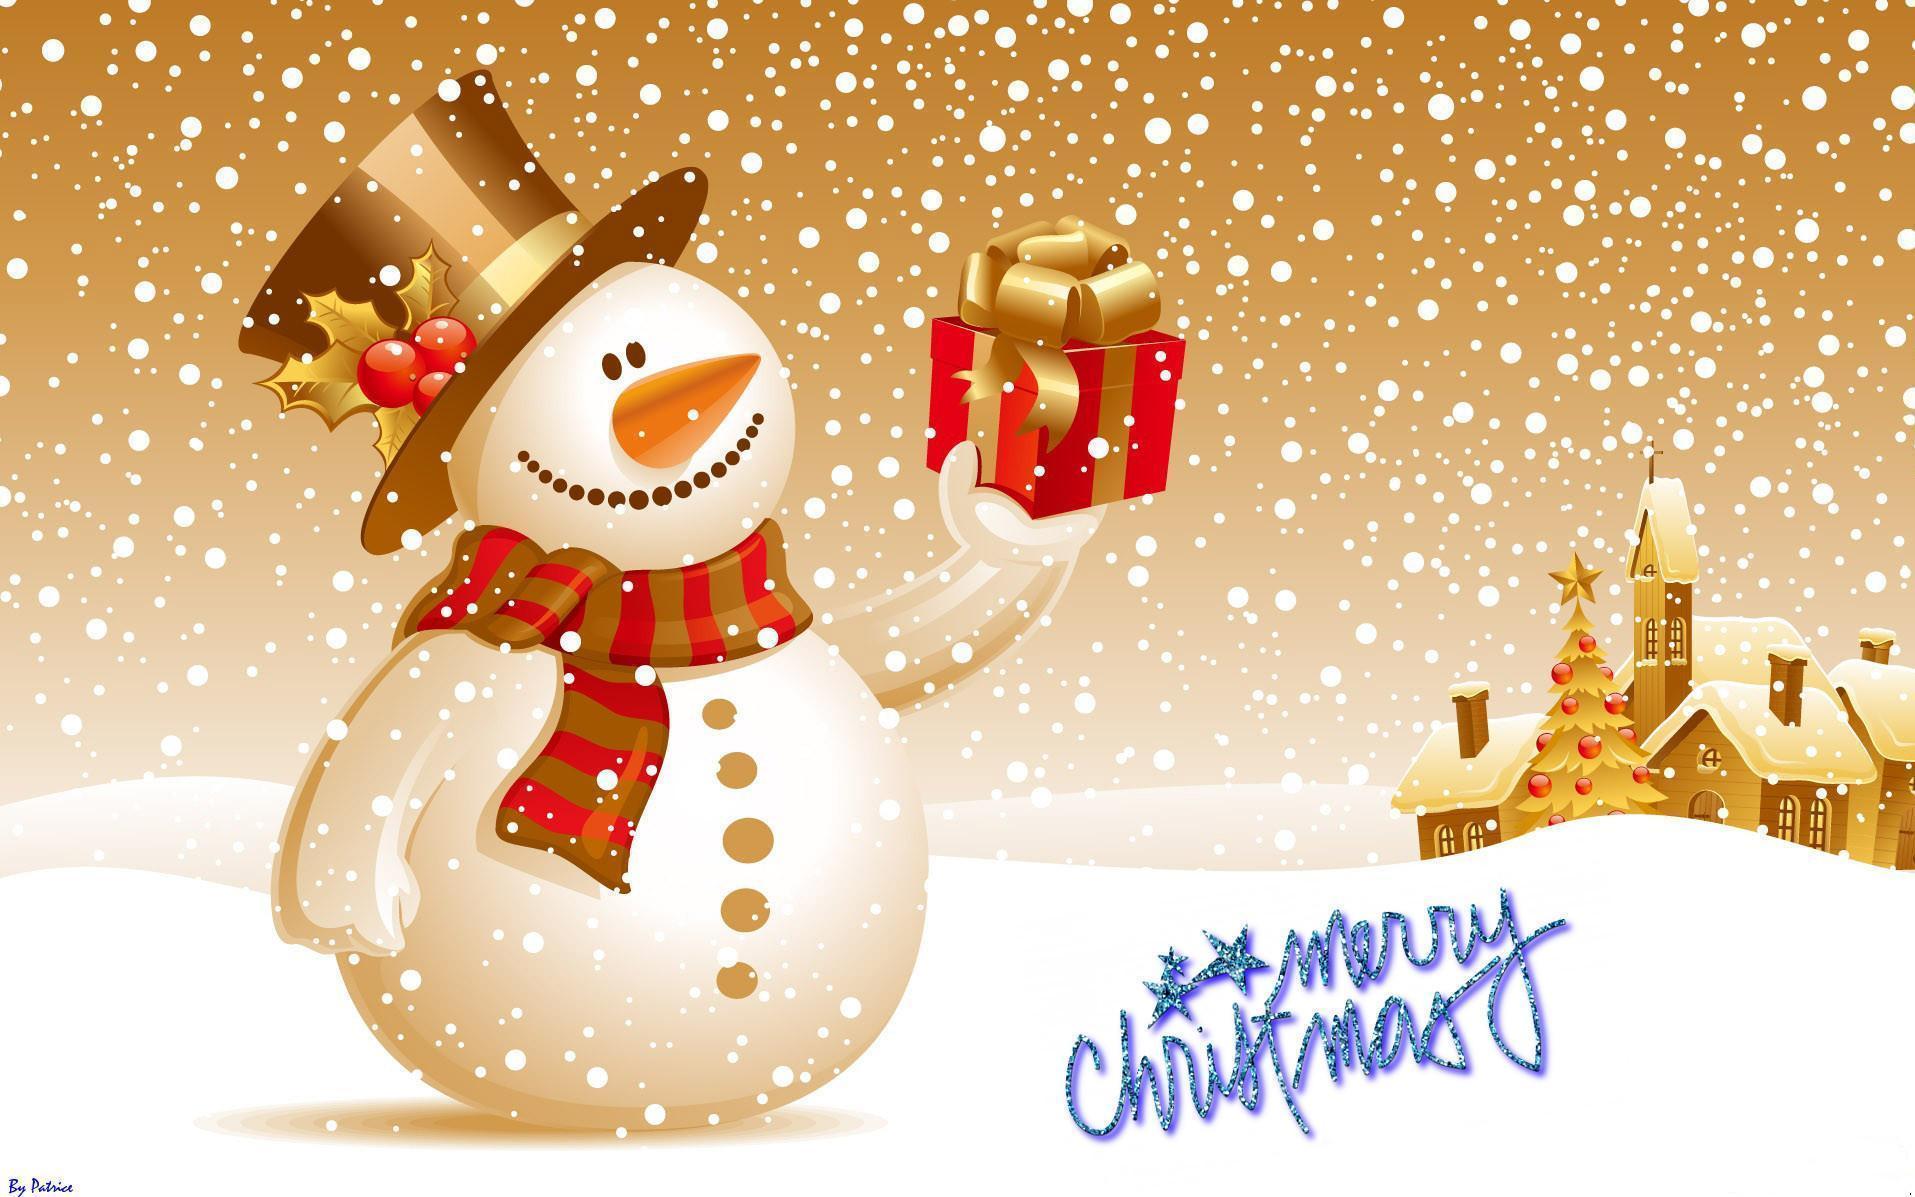 Merry Christmas Wallpaper Background